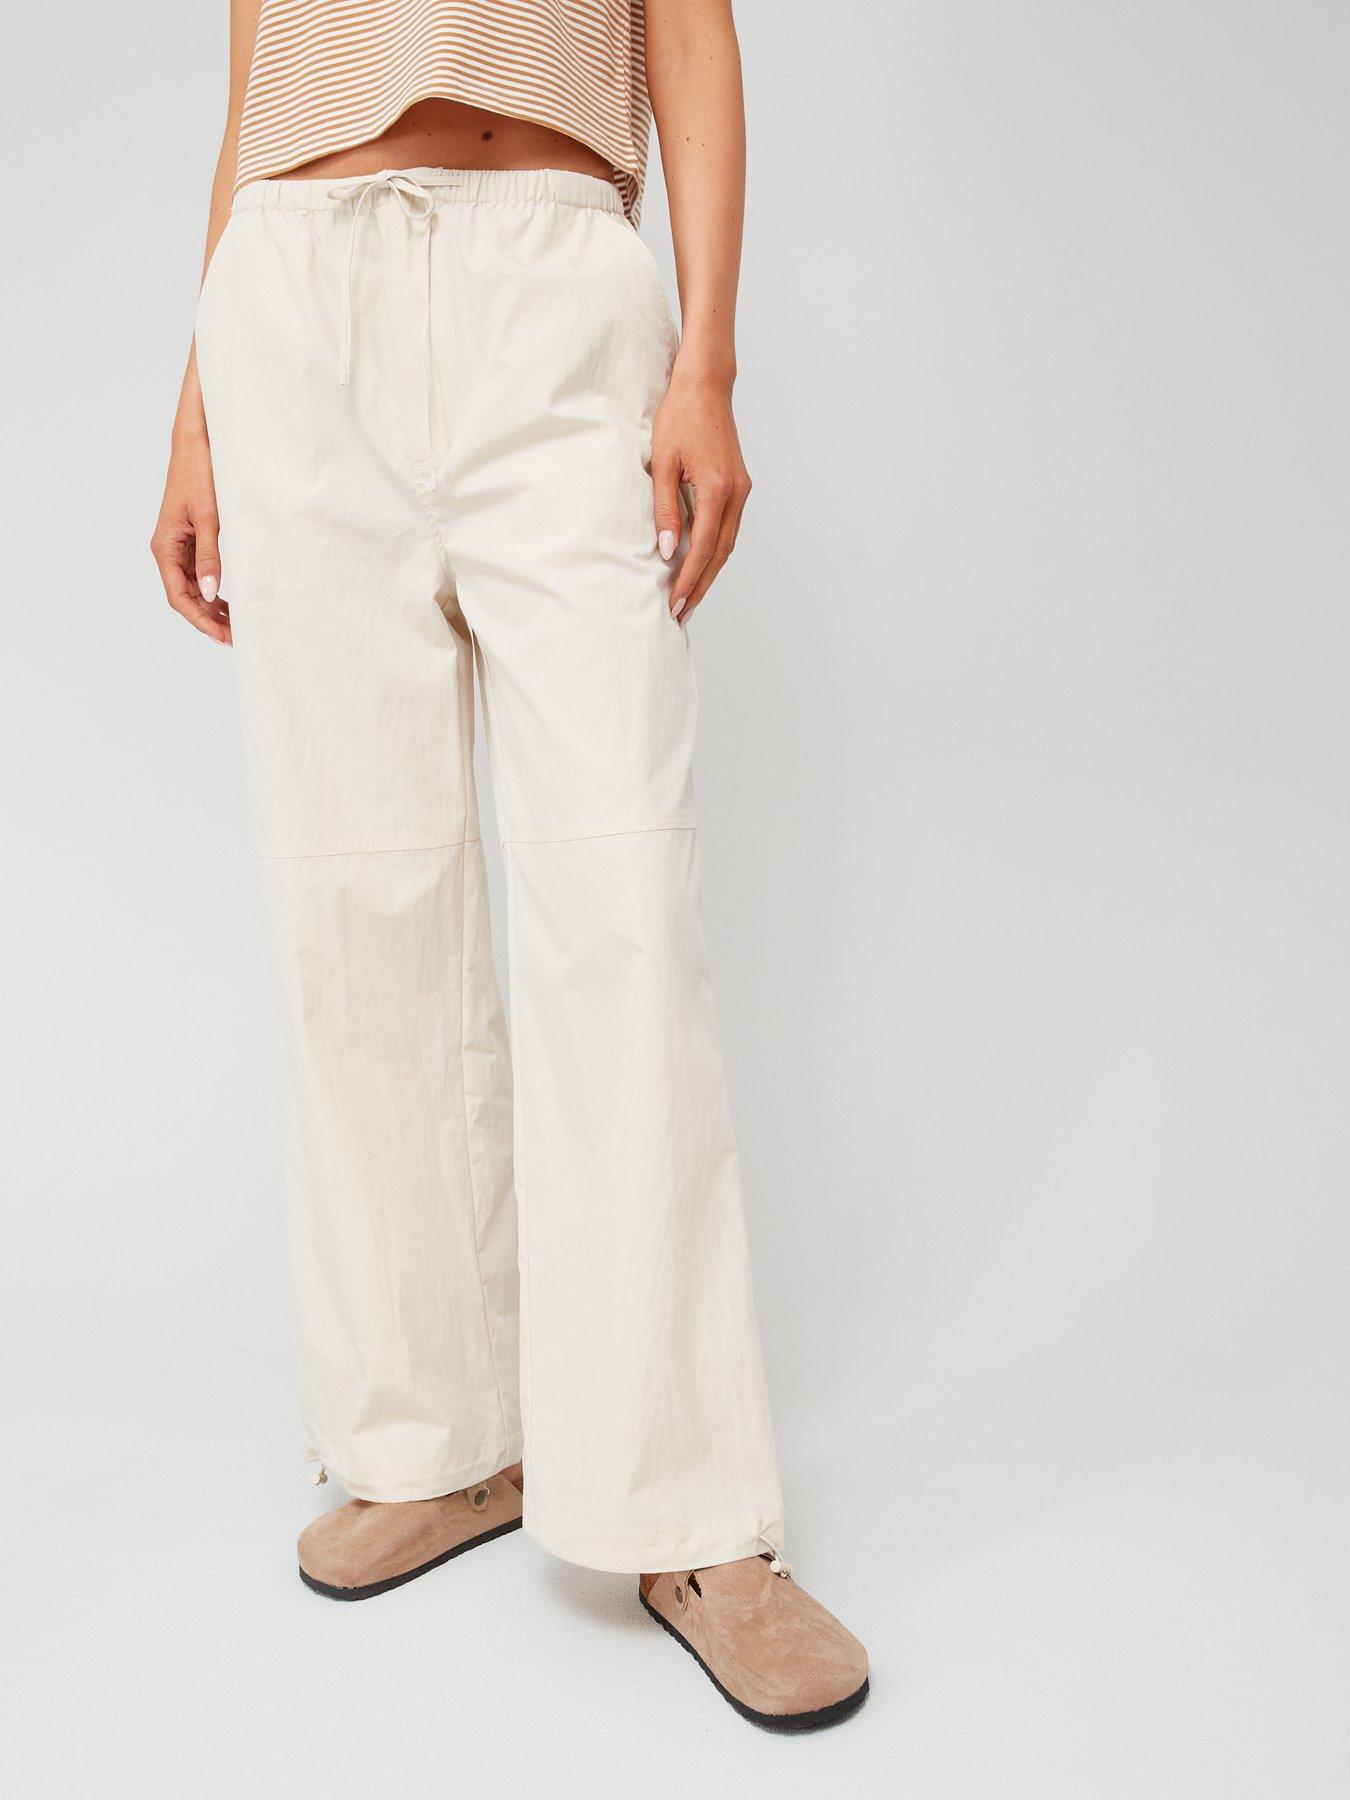 Mango Women's Cotton Culottes Trousers | CoolSprings Galleria